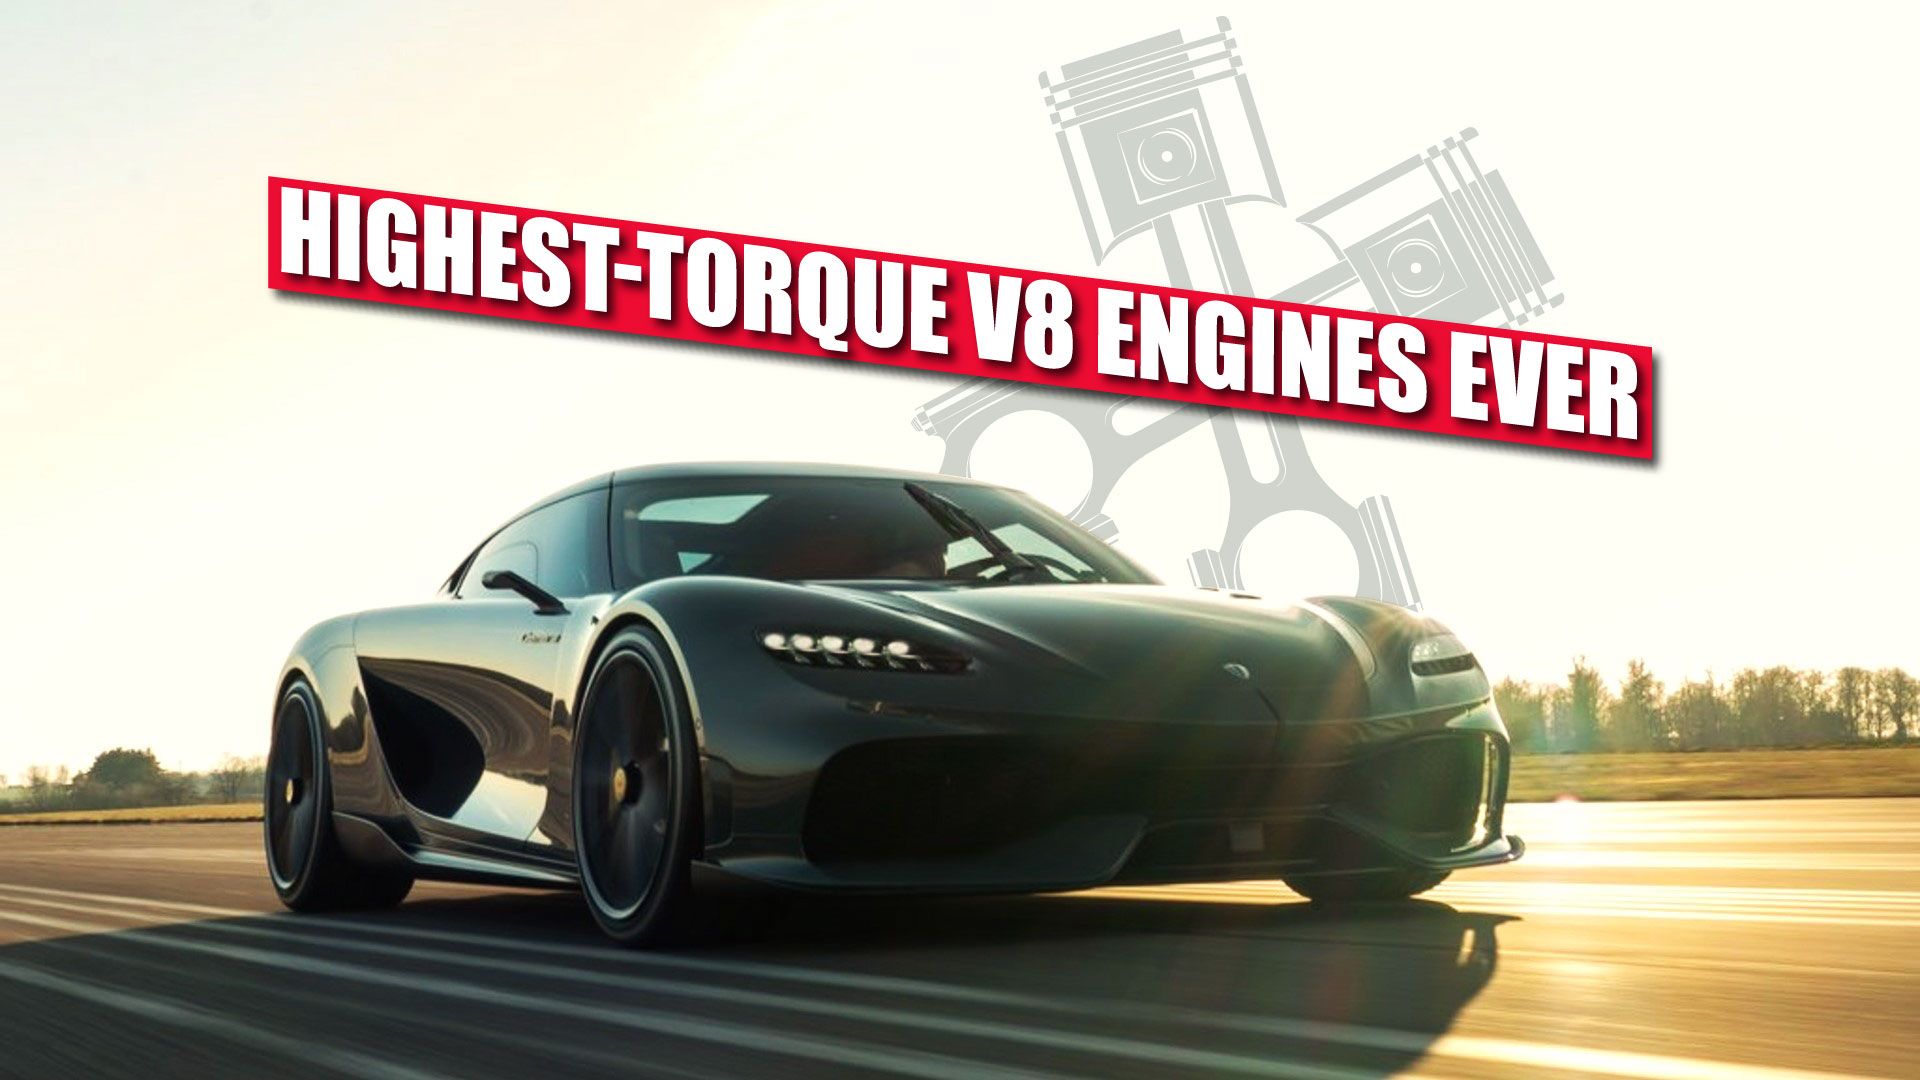 10 Highest-Torque V8 Engines Ever In A Production Car